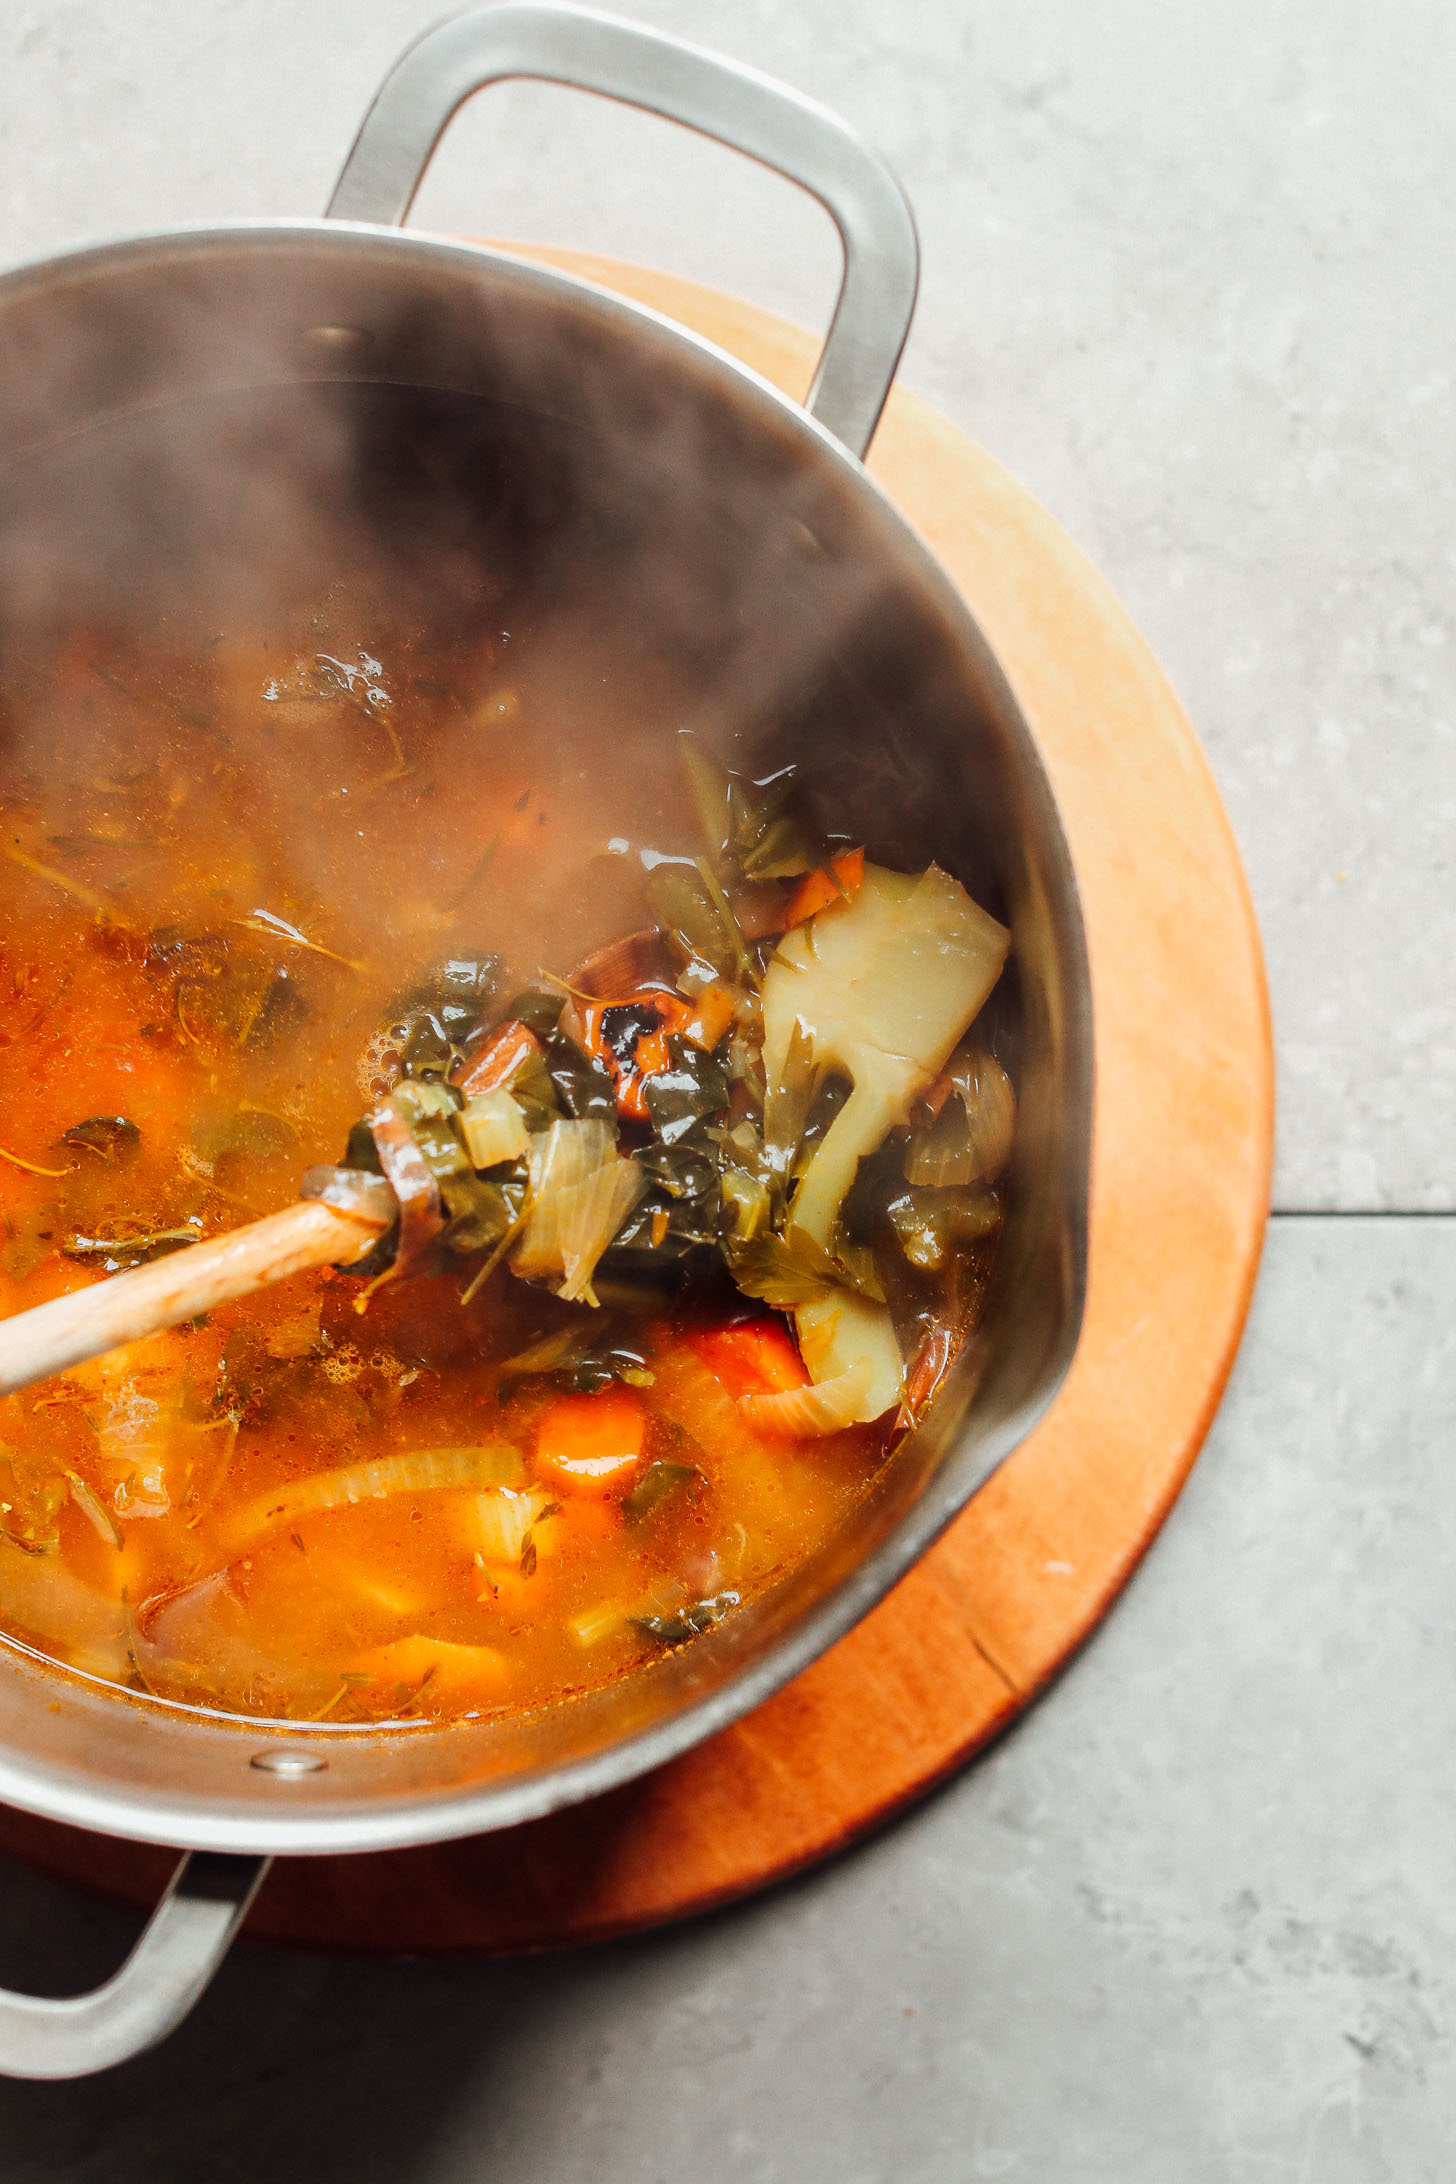 Stirring a pot of simmering homemade vegetable broth